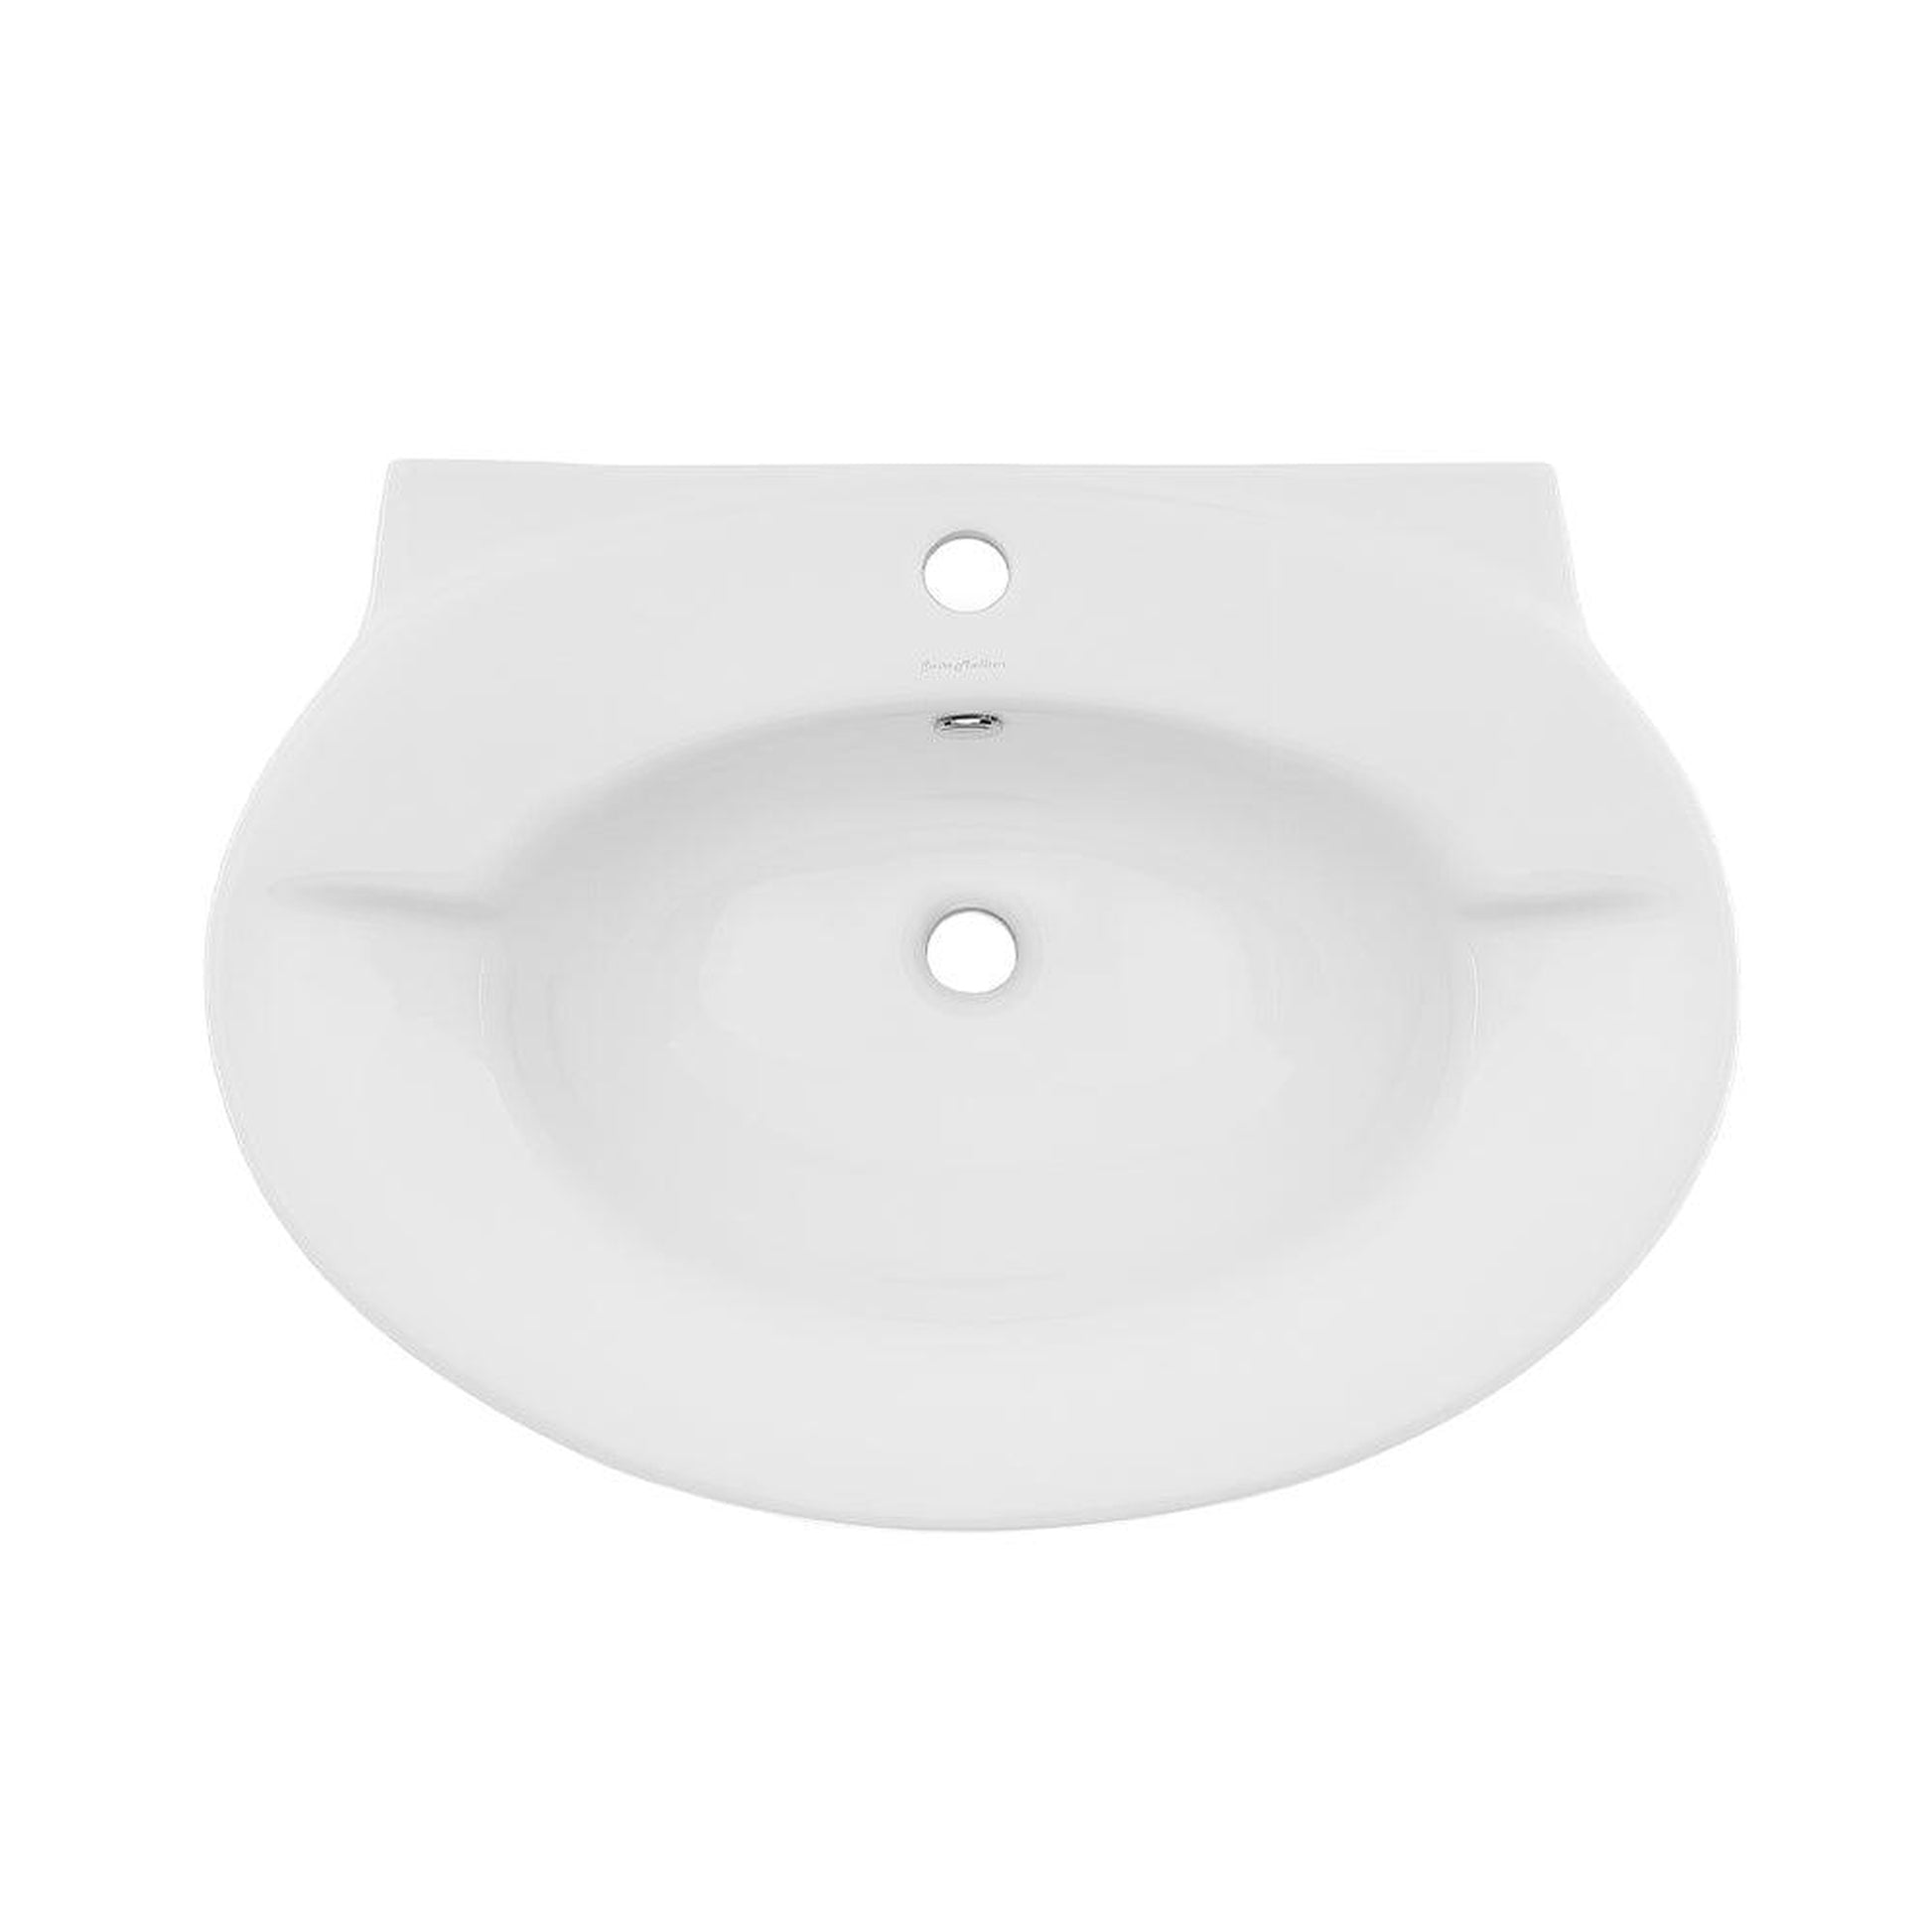 Swiss Madison Plaisir 28" x 33" Freestanding Two-Piece Rounded White Pedestal Sink With Overflow